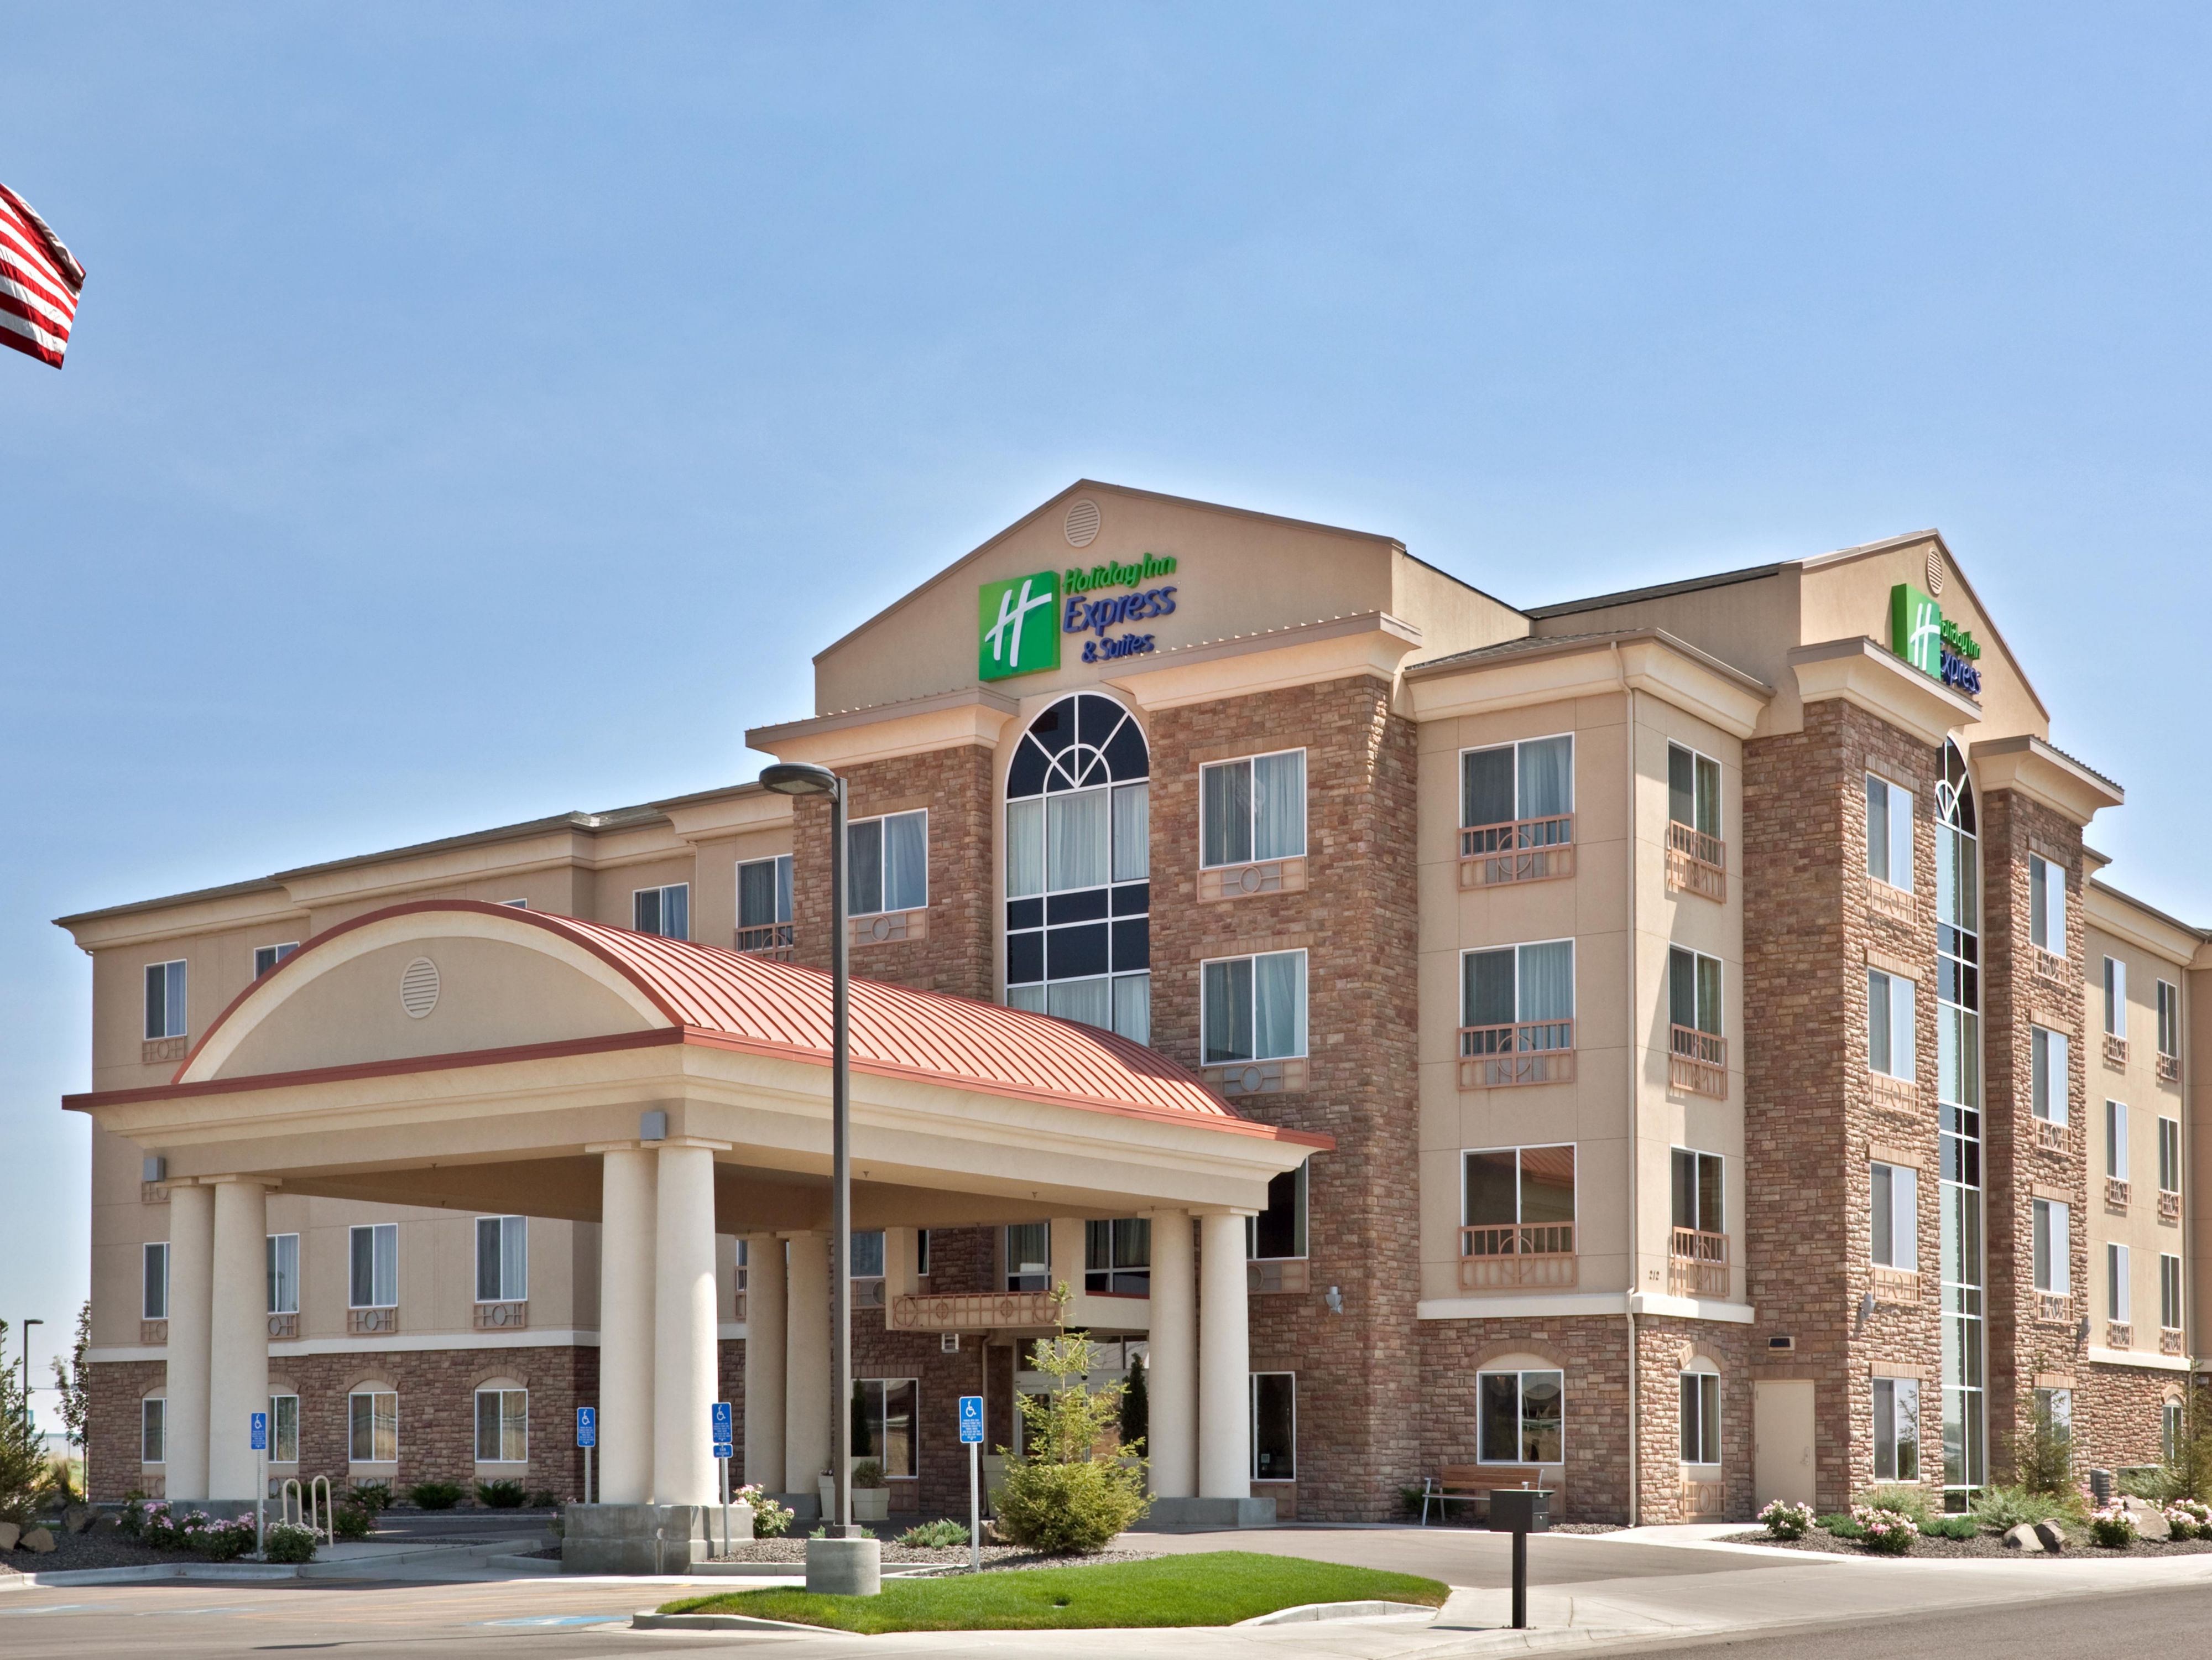 Holiday Inn Express And Suites Ontario 4293606317 4x3